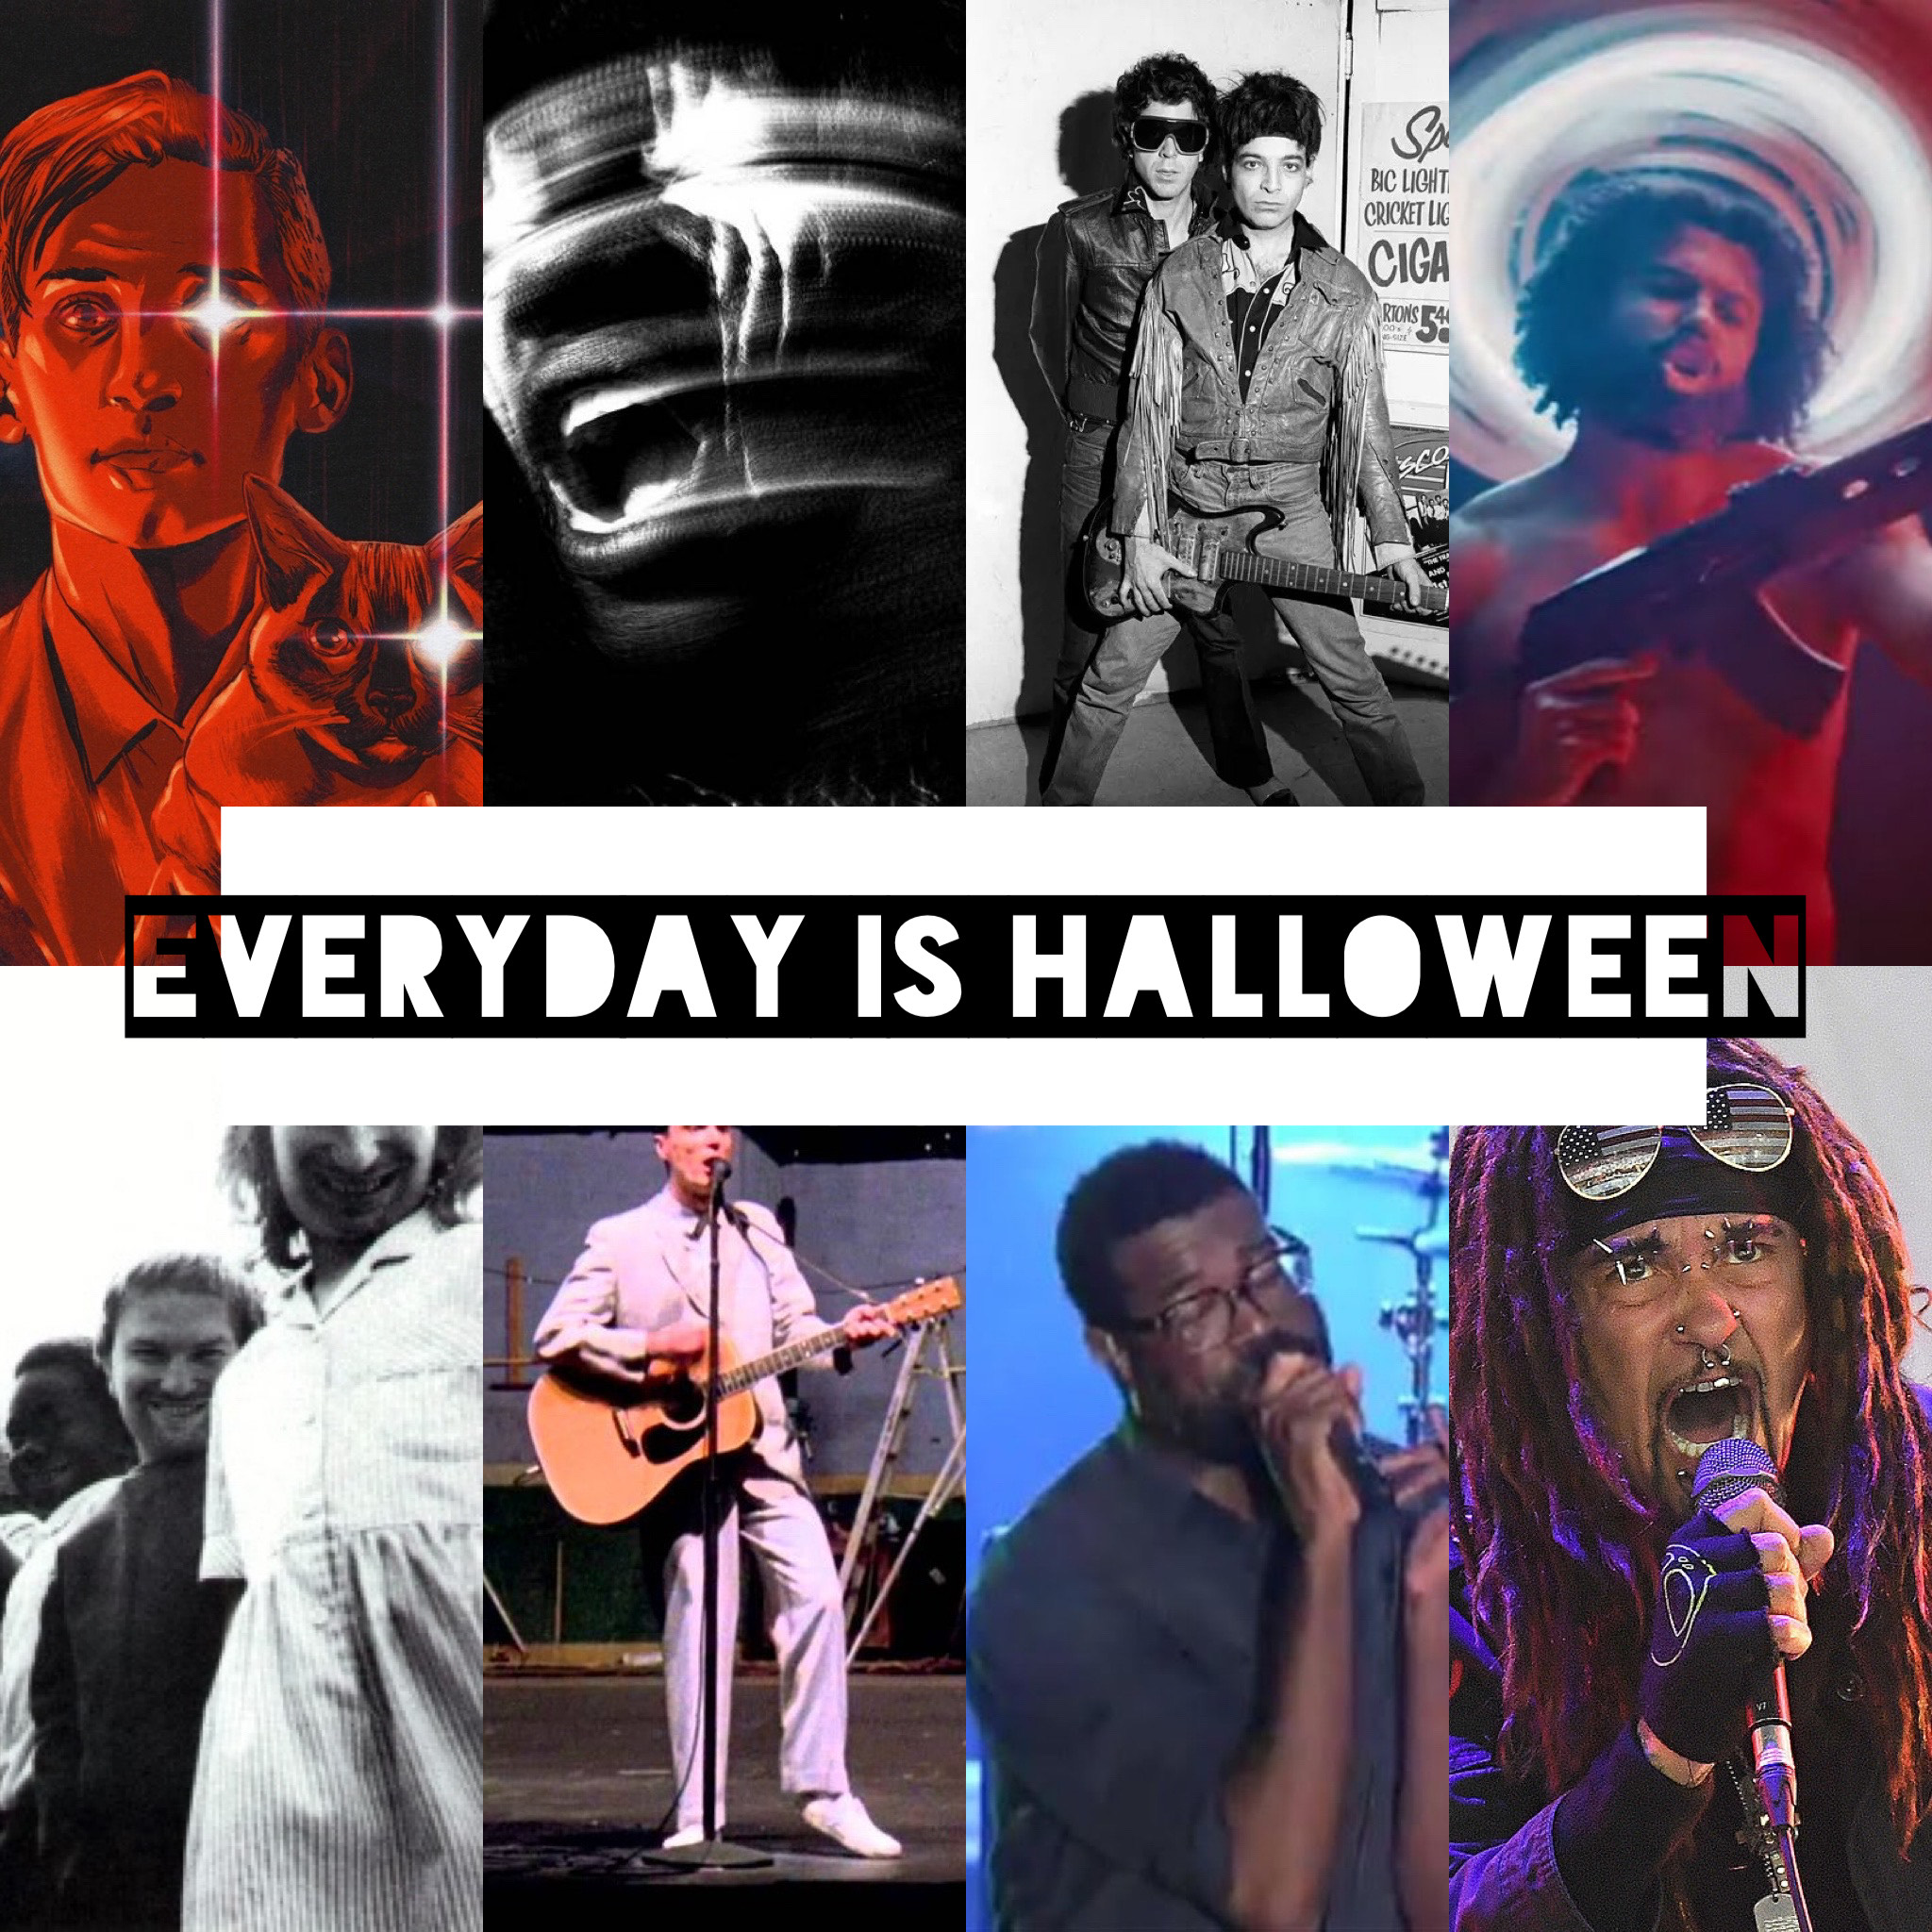 Every day is Halloween.